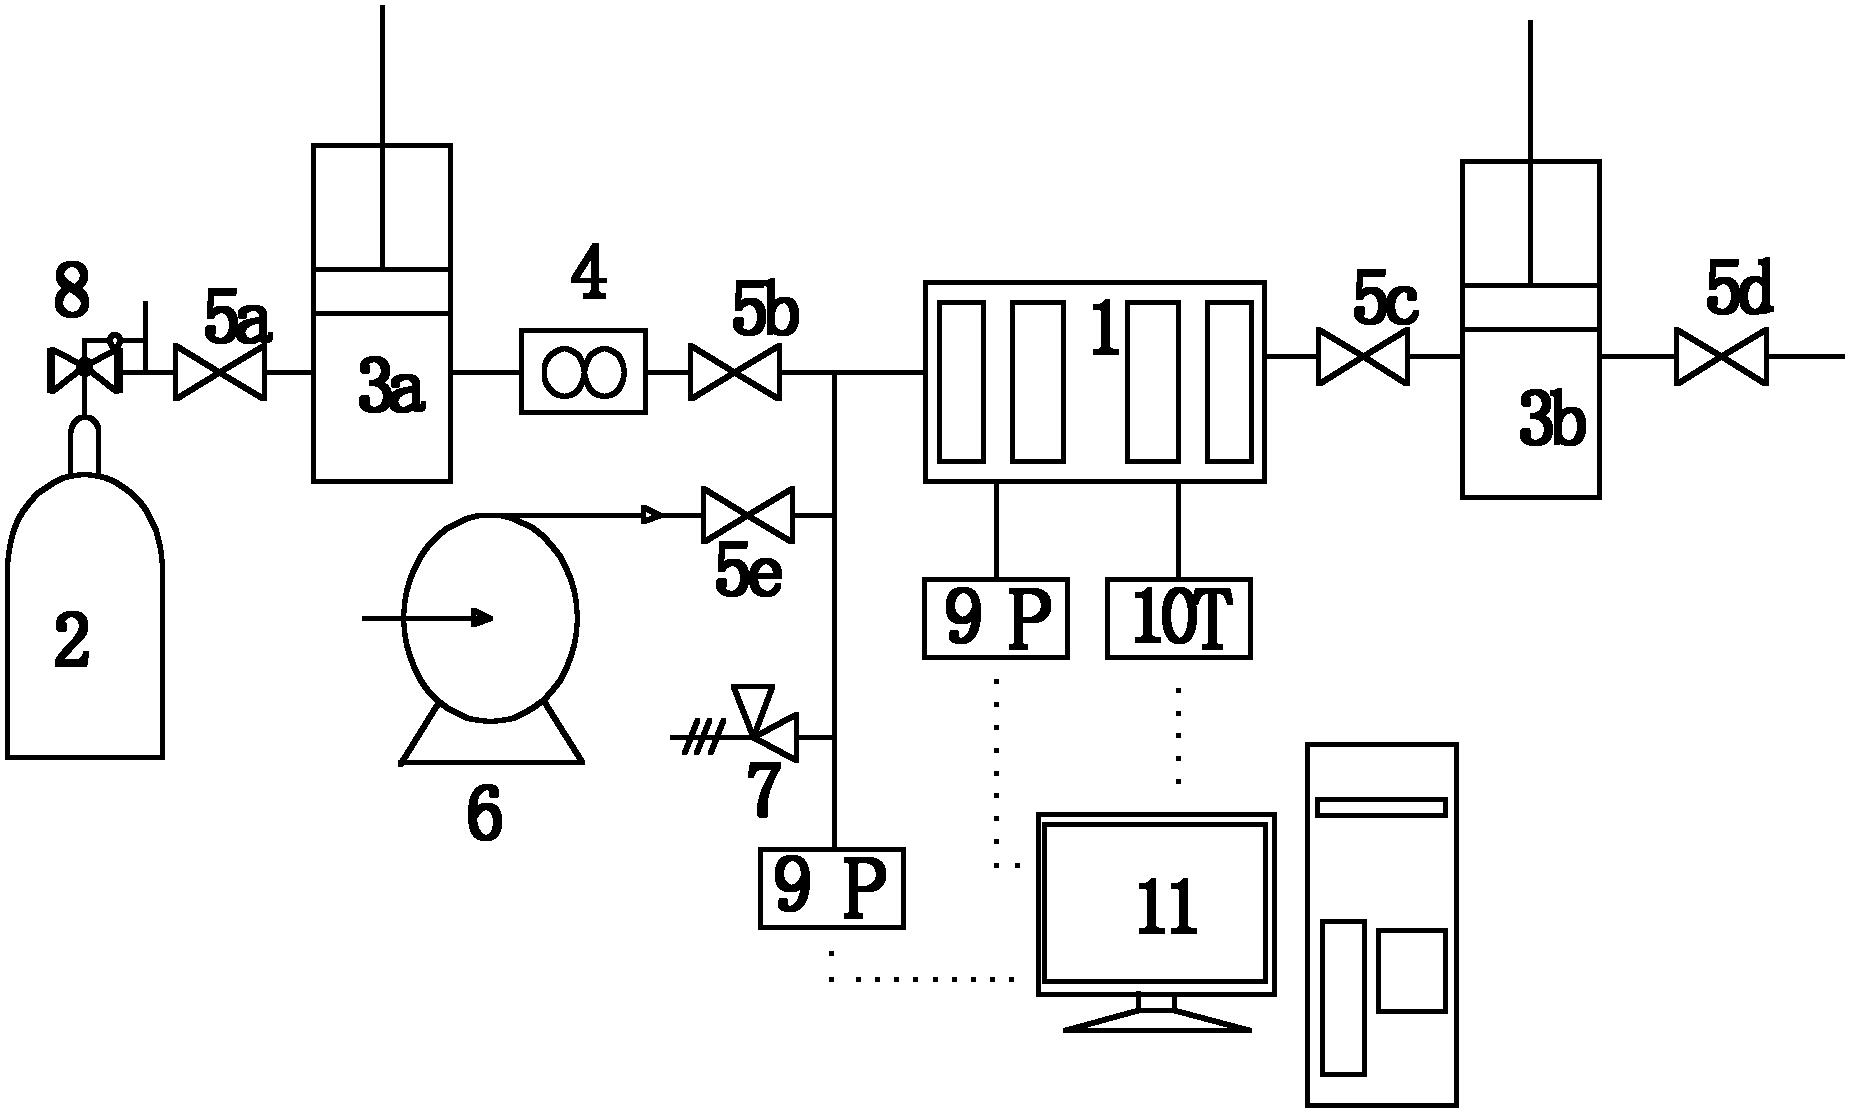 In-parallel reaction kettles and reaction-kettle-based device for testing induction time of hydrates